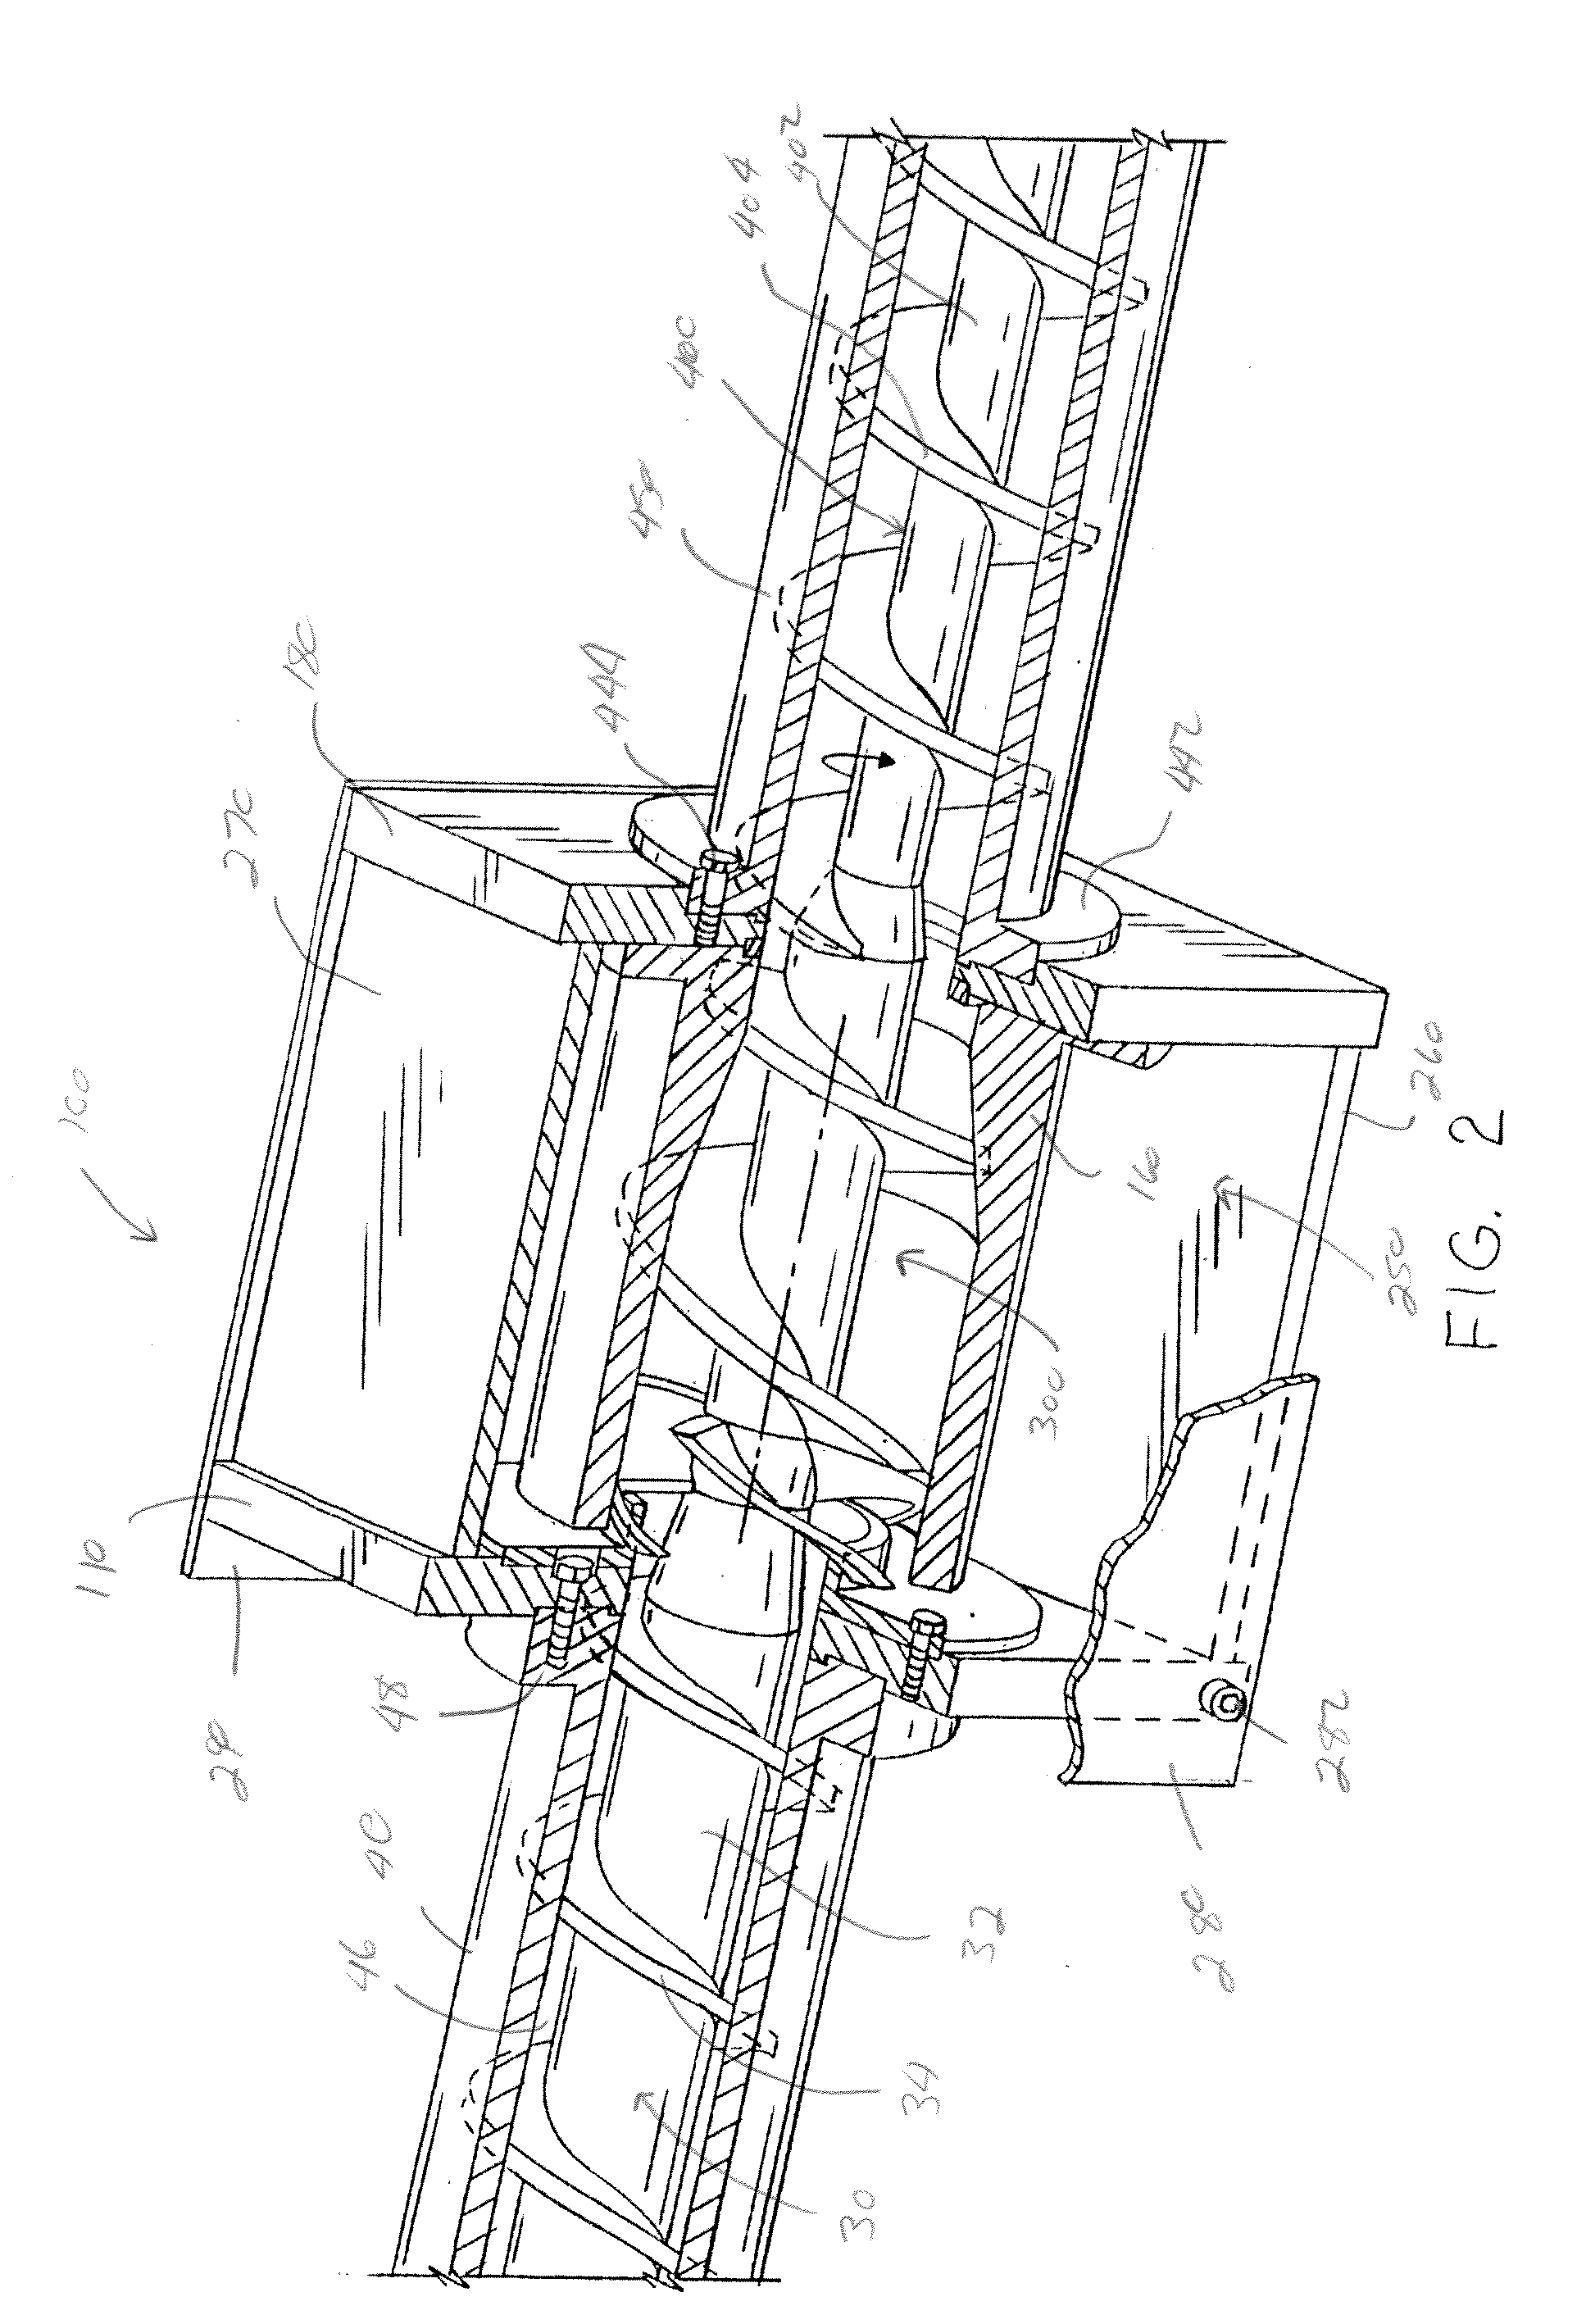 Apparatus and process for de-airing material in an extruder